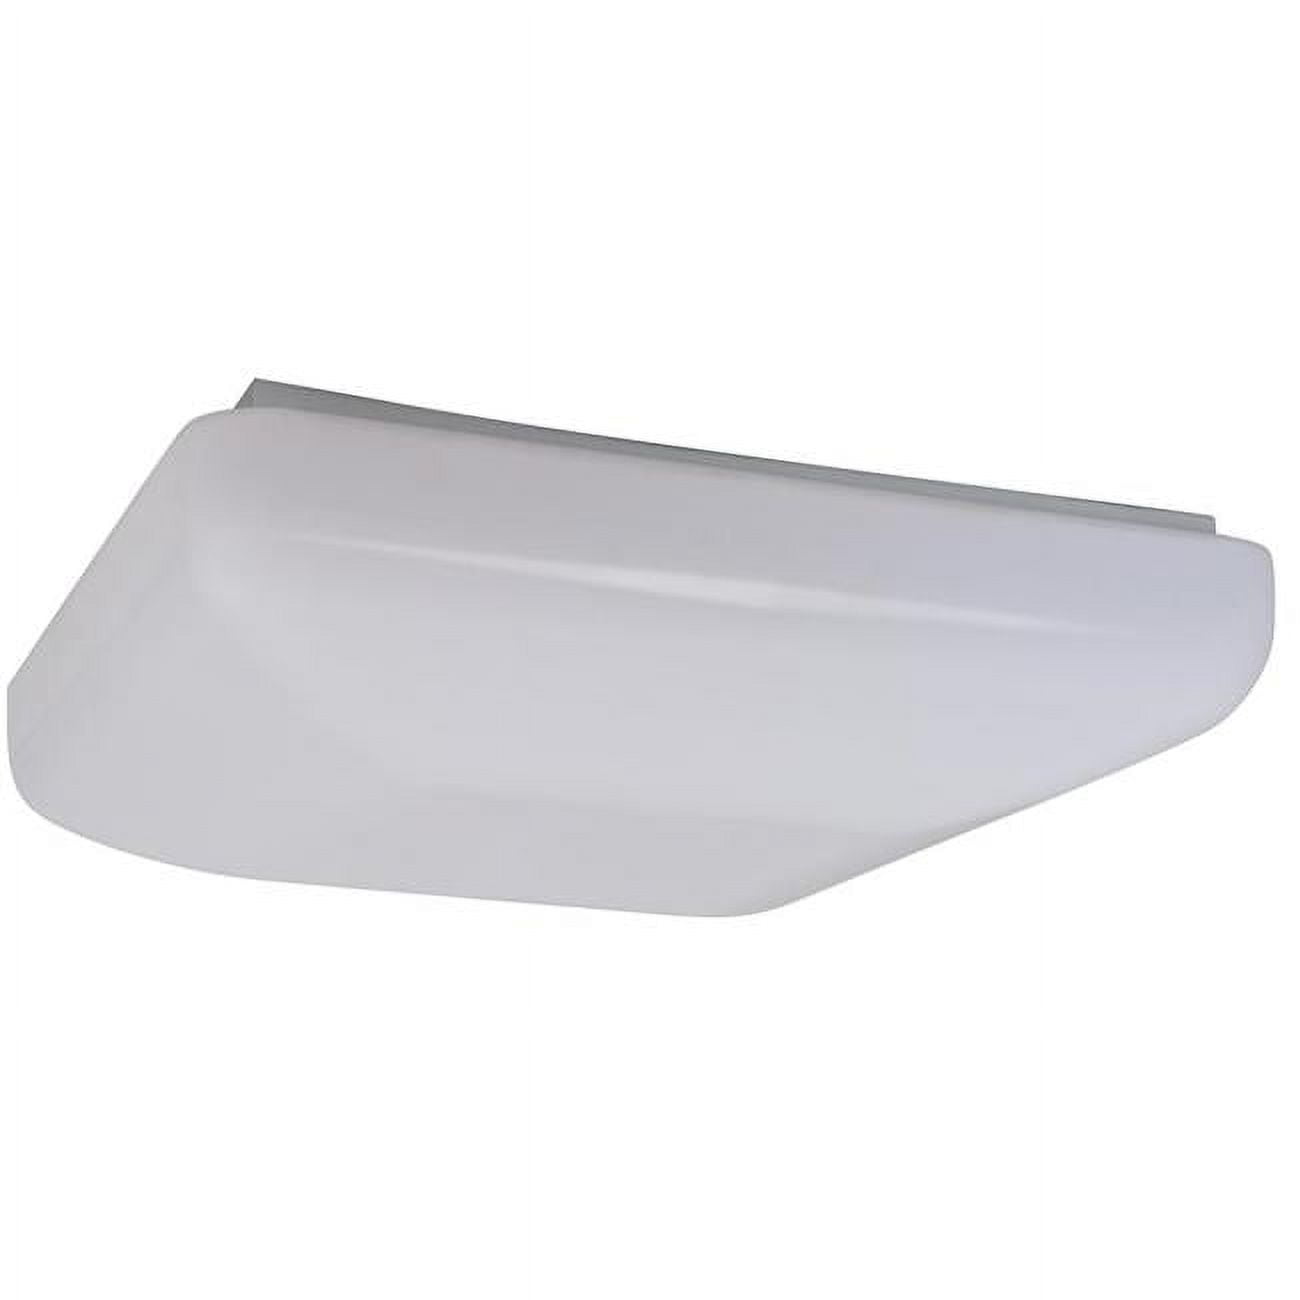 Led-s002l-w 14.5 X 3.5 In. Led Ceiling Fixture Square - White